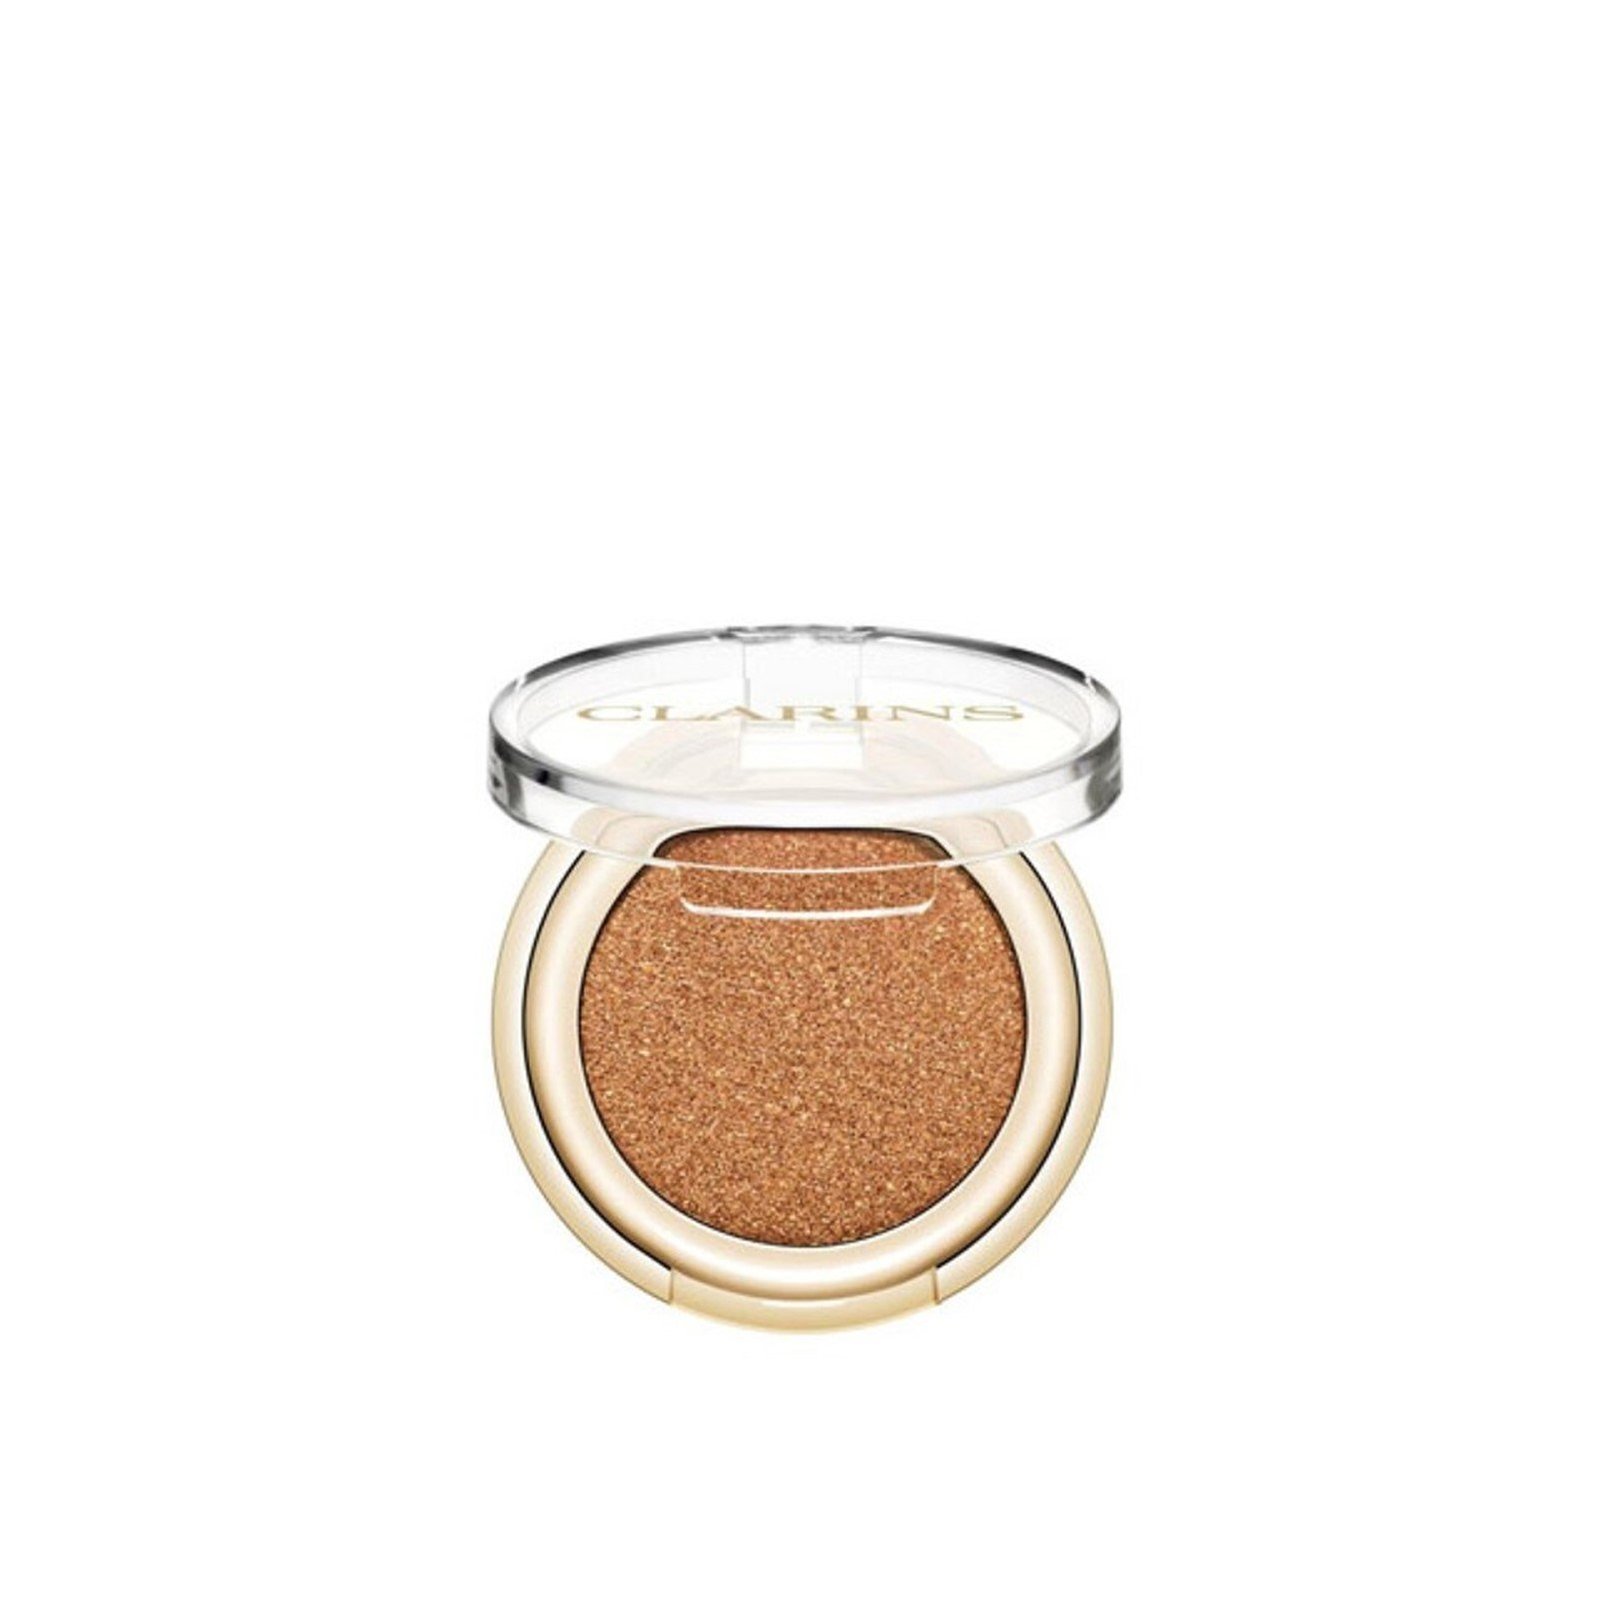 Clarins Ombre Skin Intense Colour Powder Eyeshadow 07 Pearly Copper 1.5g